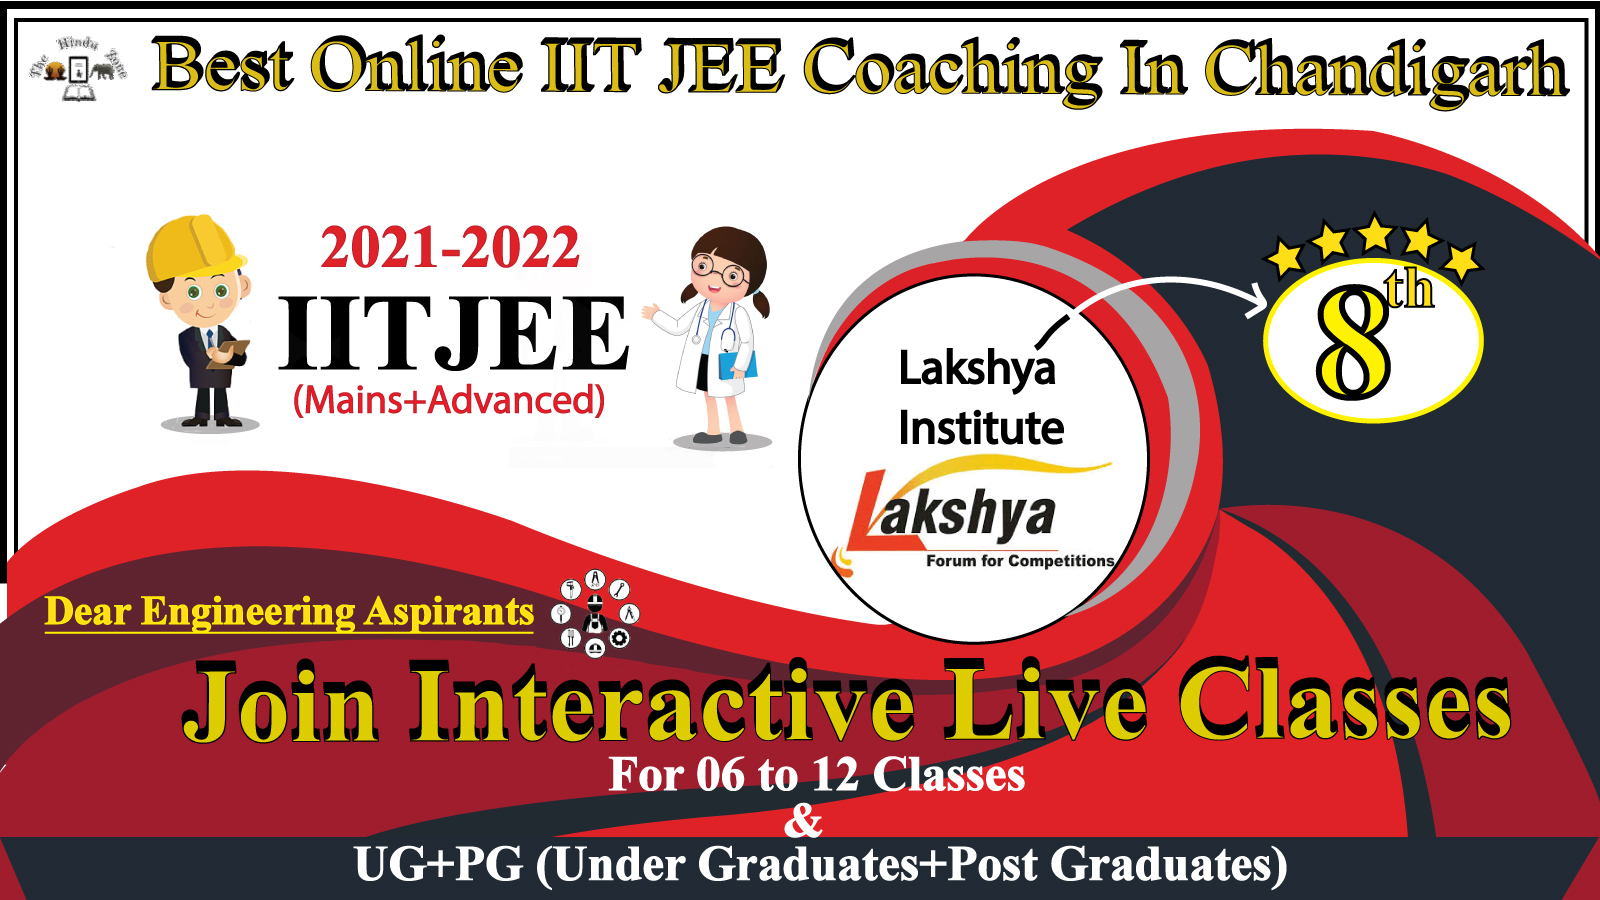 Lakshya Institute For IIT JEE In Chandigarh 